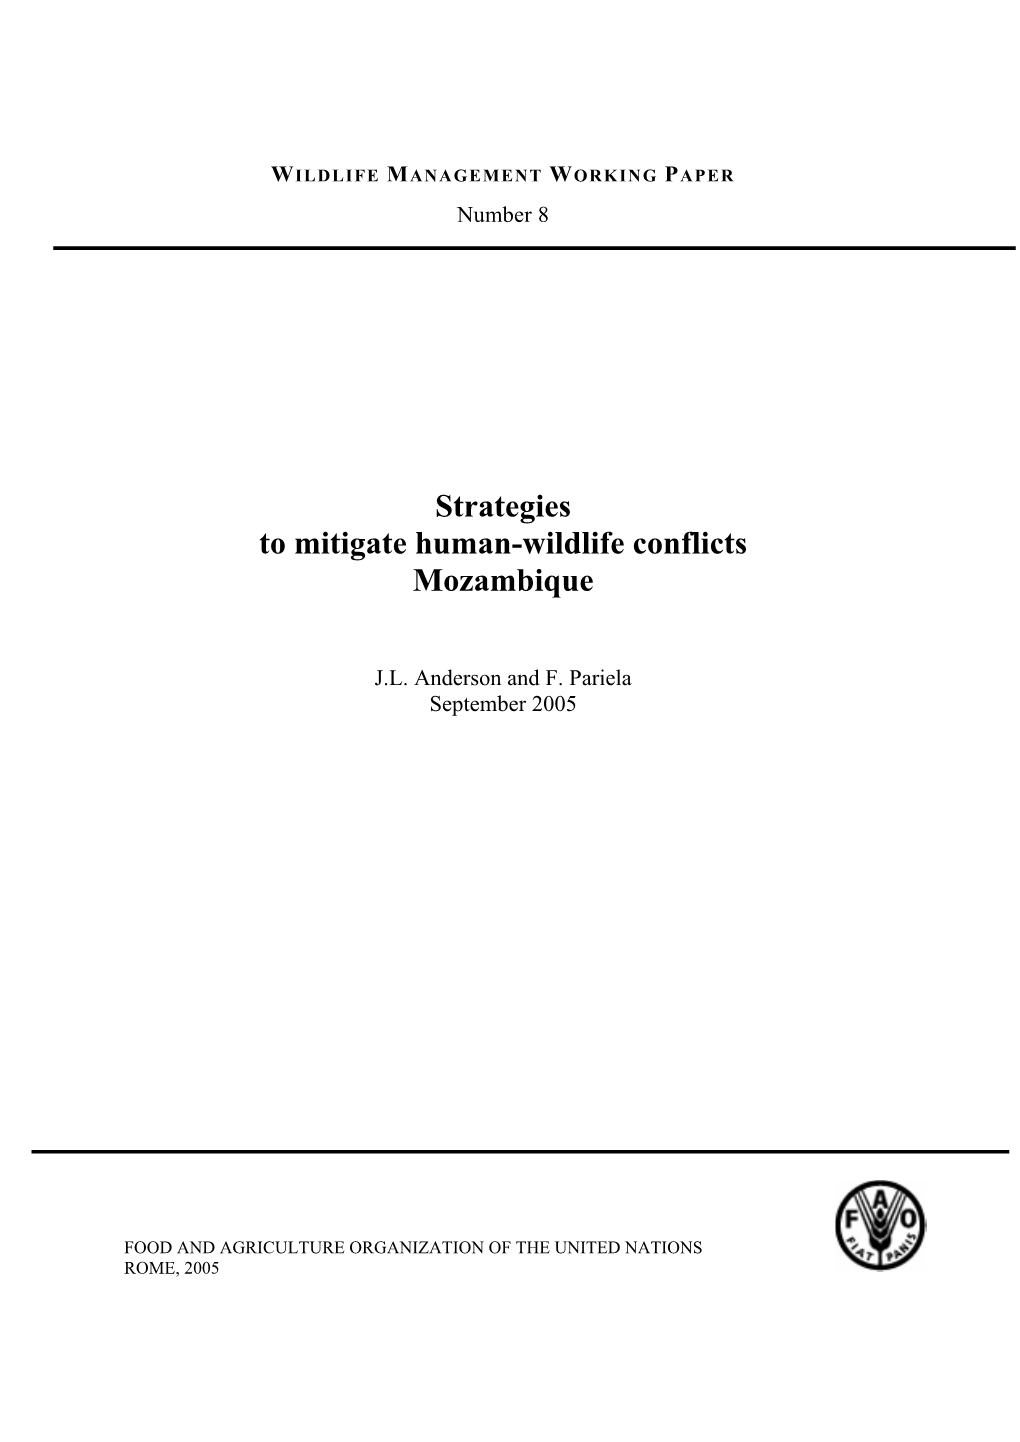 Strategies to Mitigate Human-Wildlife Conflicts Mozambique